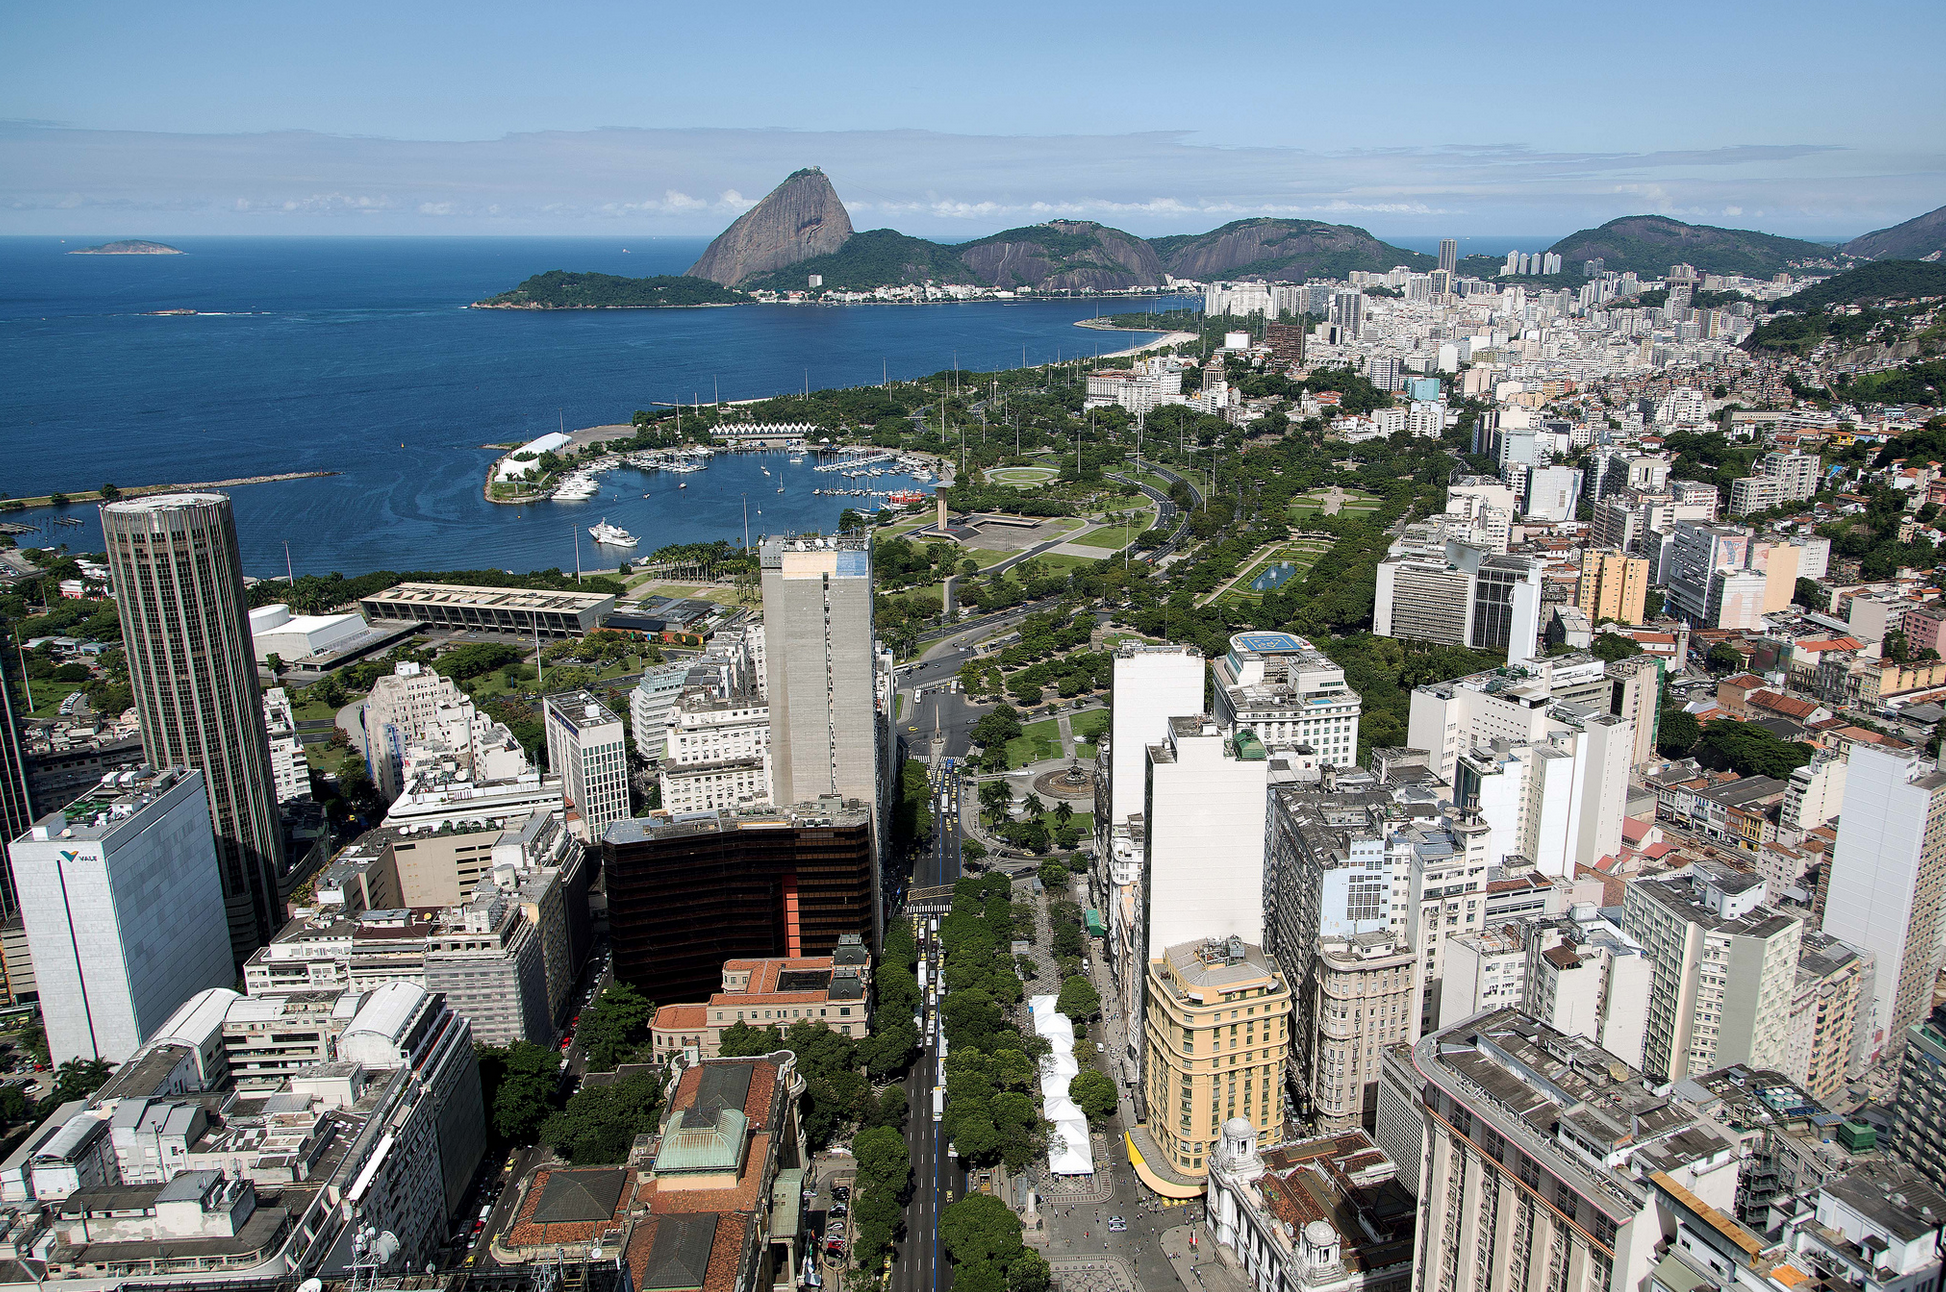 Real Estate Market Cools in Brazil, But Not Crashing Yet